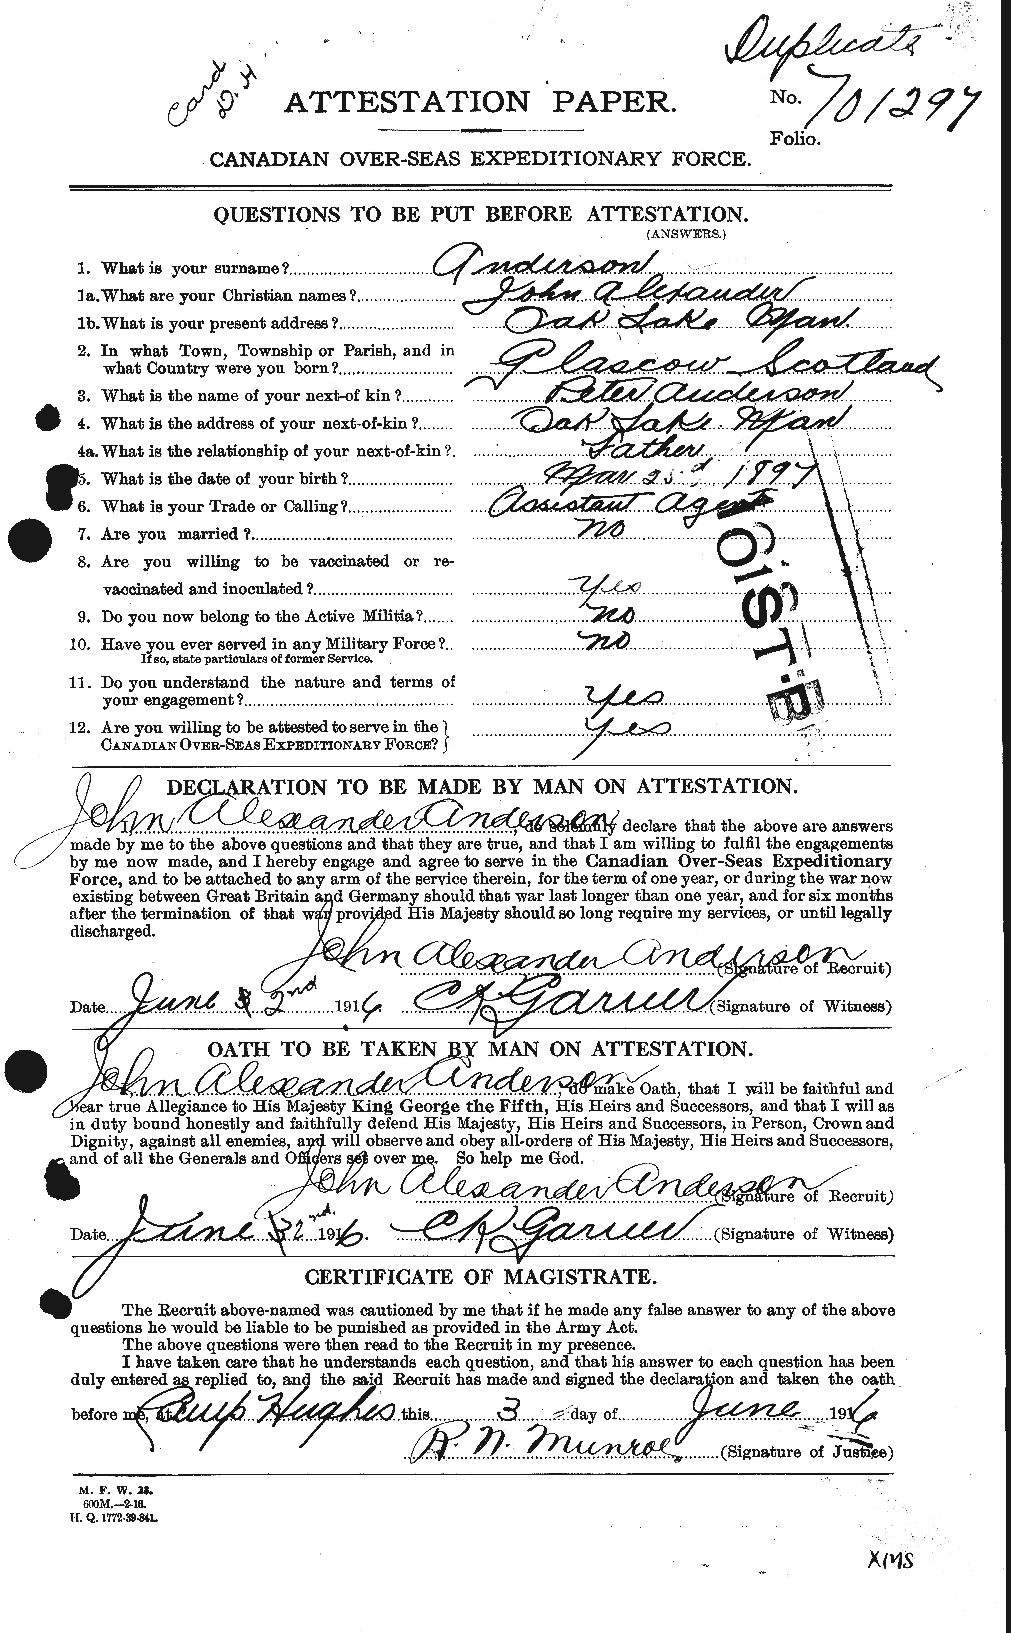 Personnel Records of the First World War - CEF 207689a